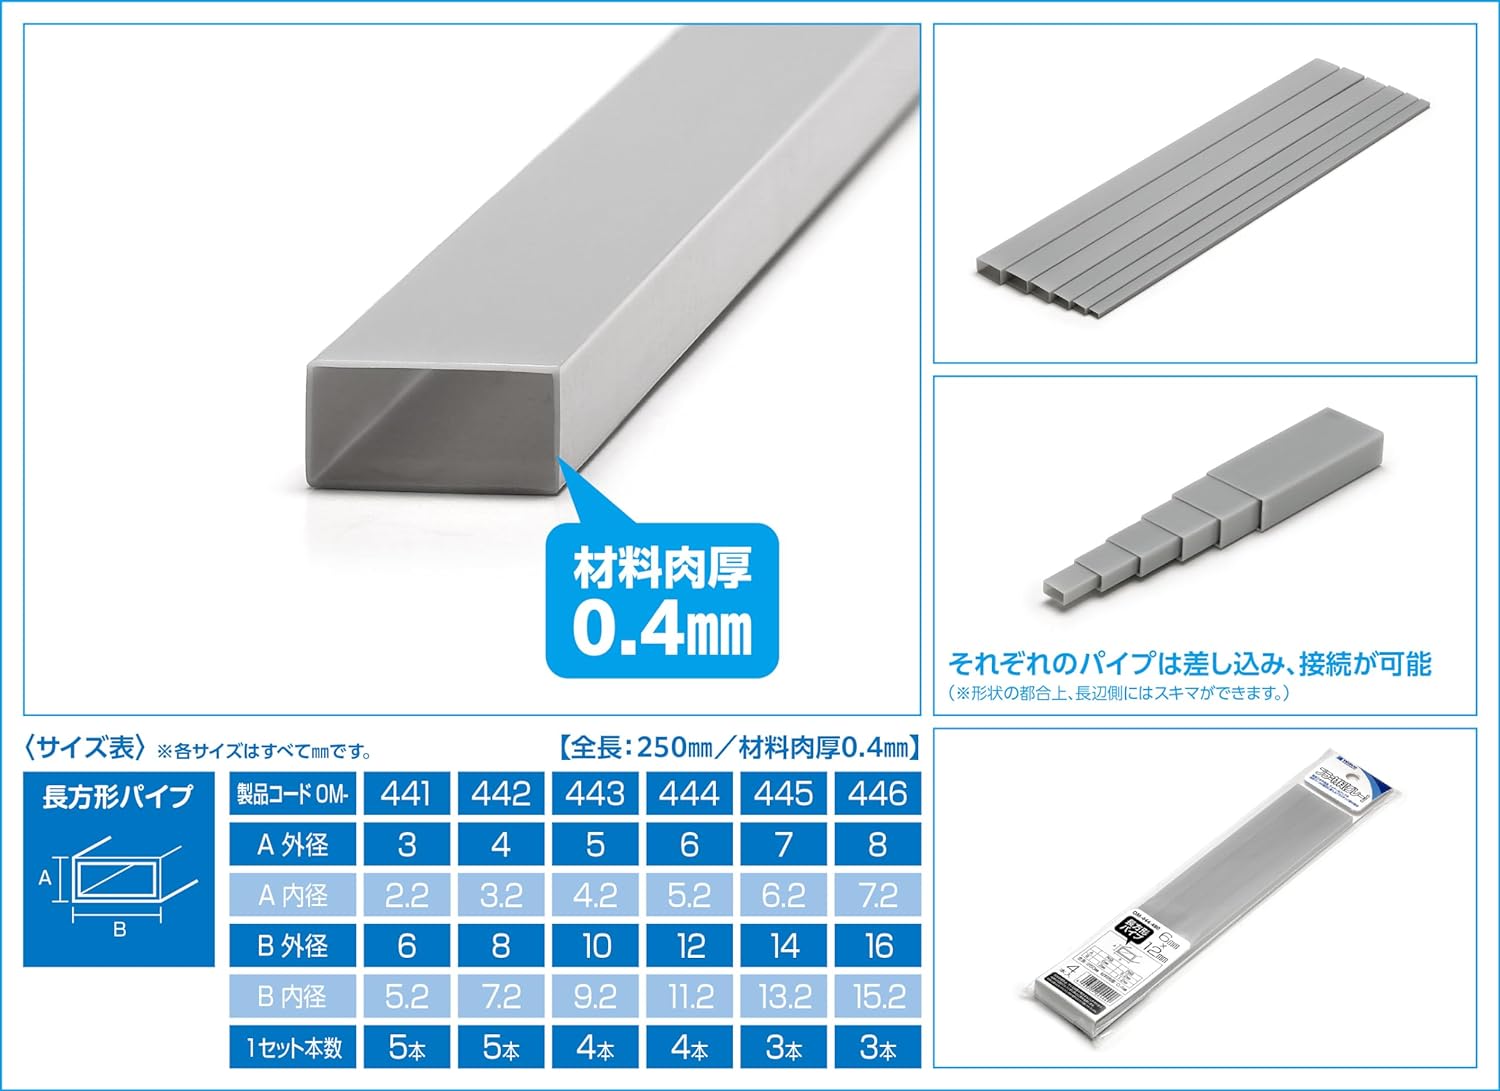 Wave OM-446 Plastic Material Gray Rectangular Pipe 0.3 x 0.6 inches (8 x 16 mm), 3 Pieces - BanzaiHobby